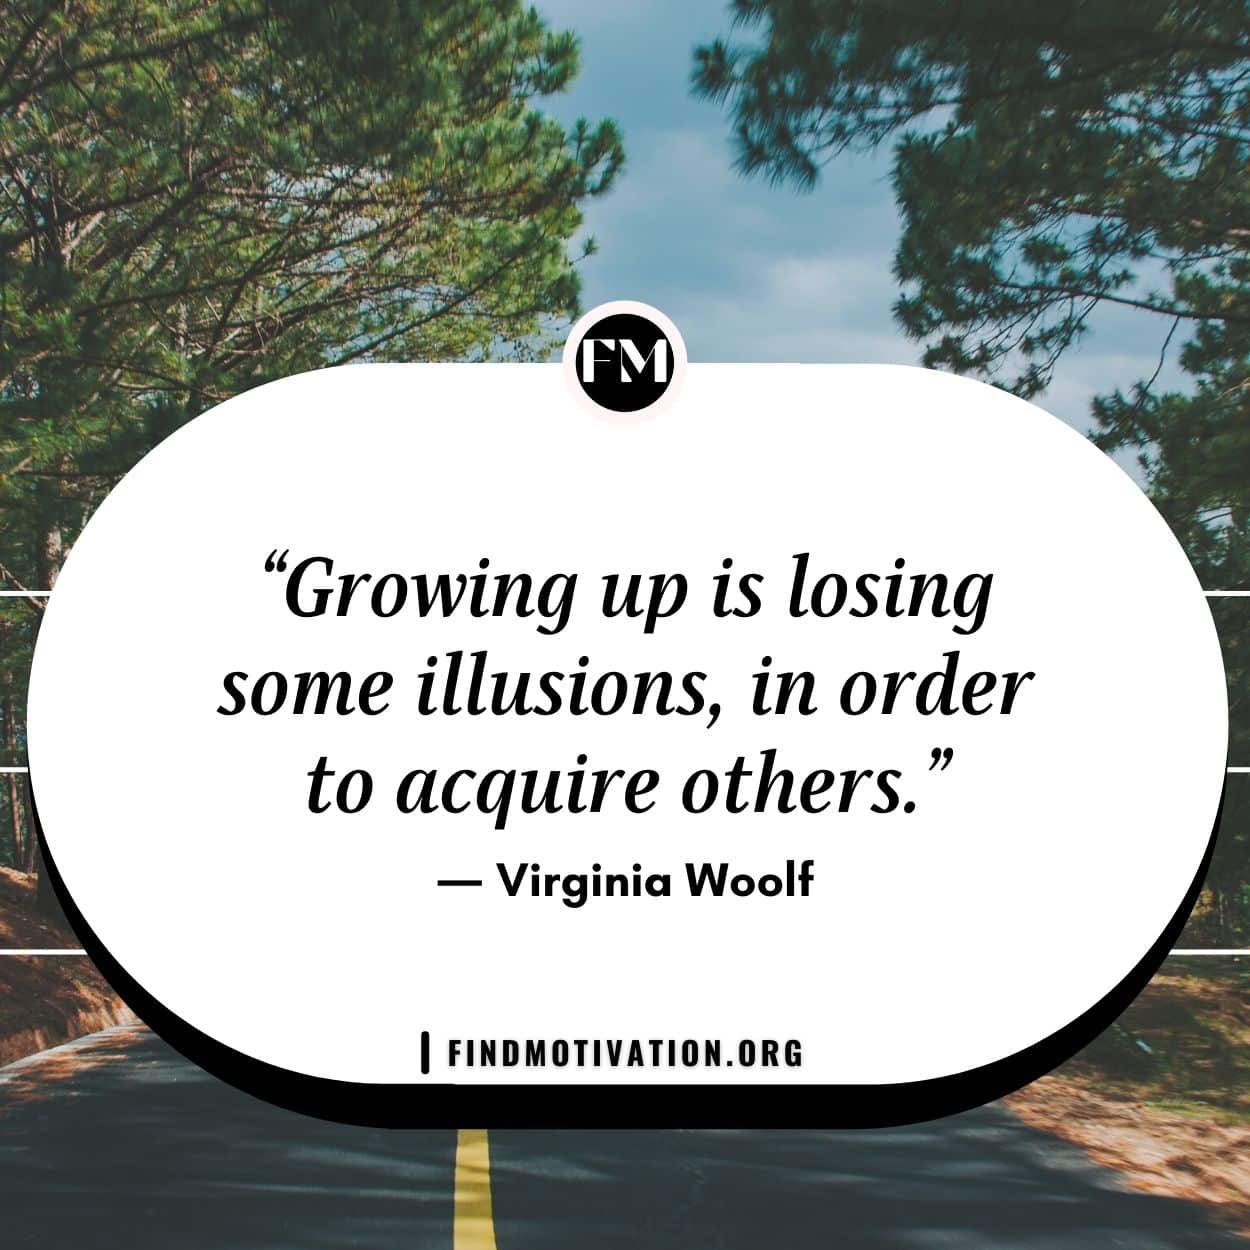 Motivational growing up quotes to expand your thinking in your life